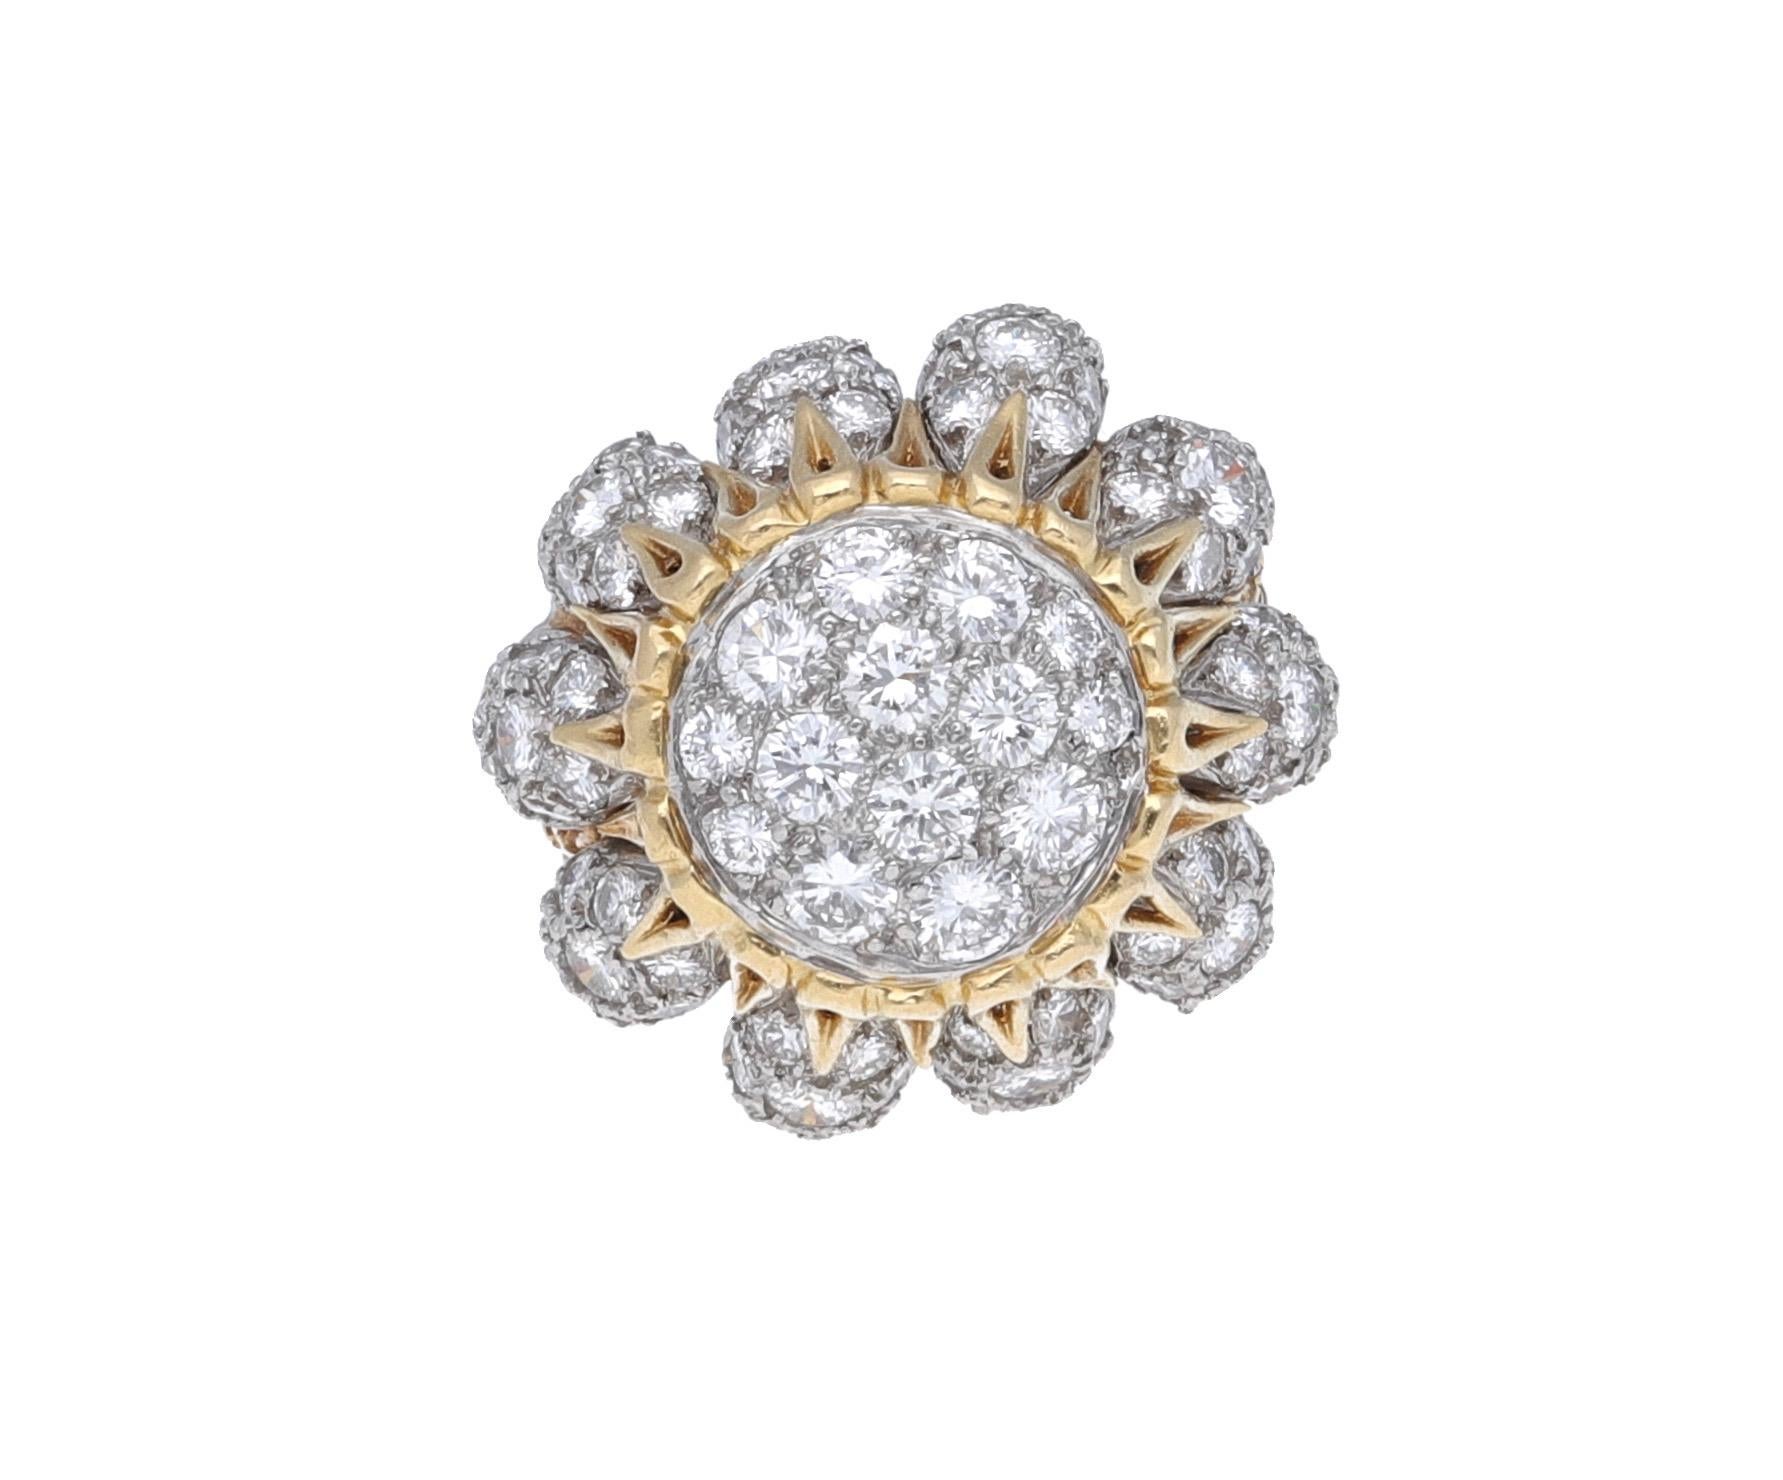 18 kt. gold yellow and white gold dome ring with 5.50 carat of round-cut diamonds.
This ring is 1950 circa and is one of a kind piece and is hand made in USA.
Size ring is 6.5 
